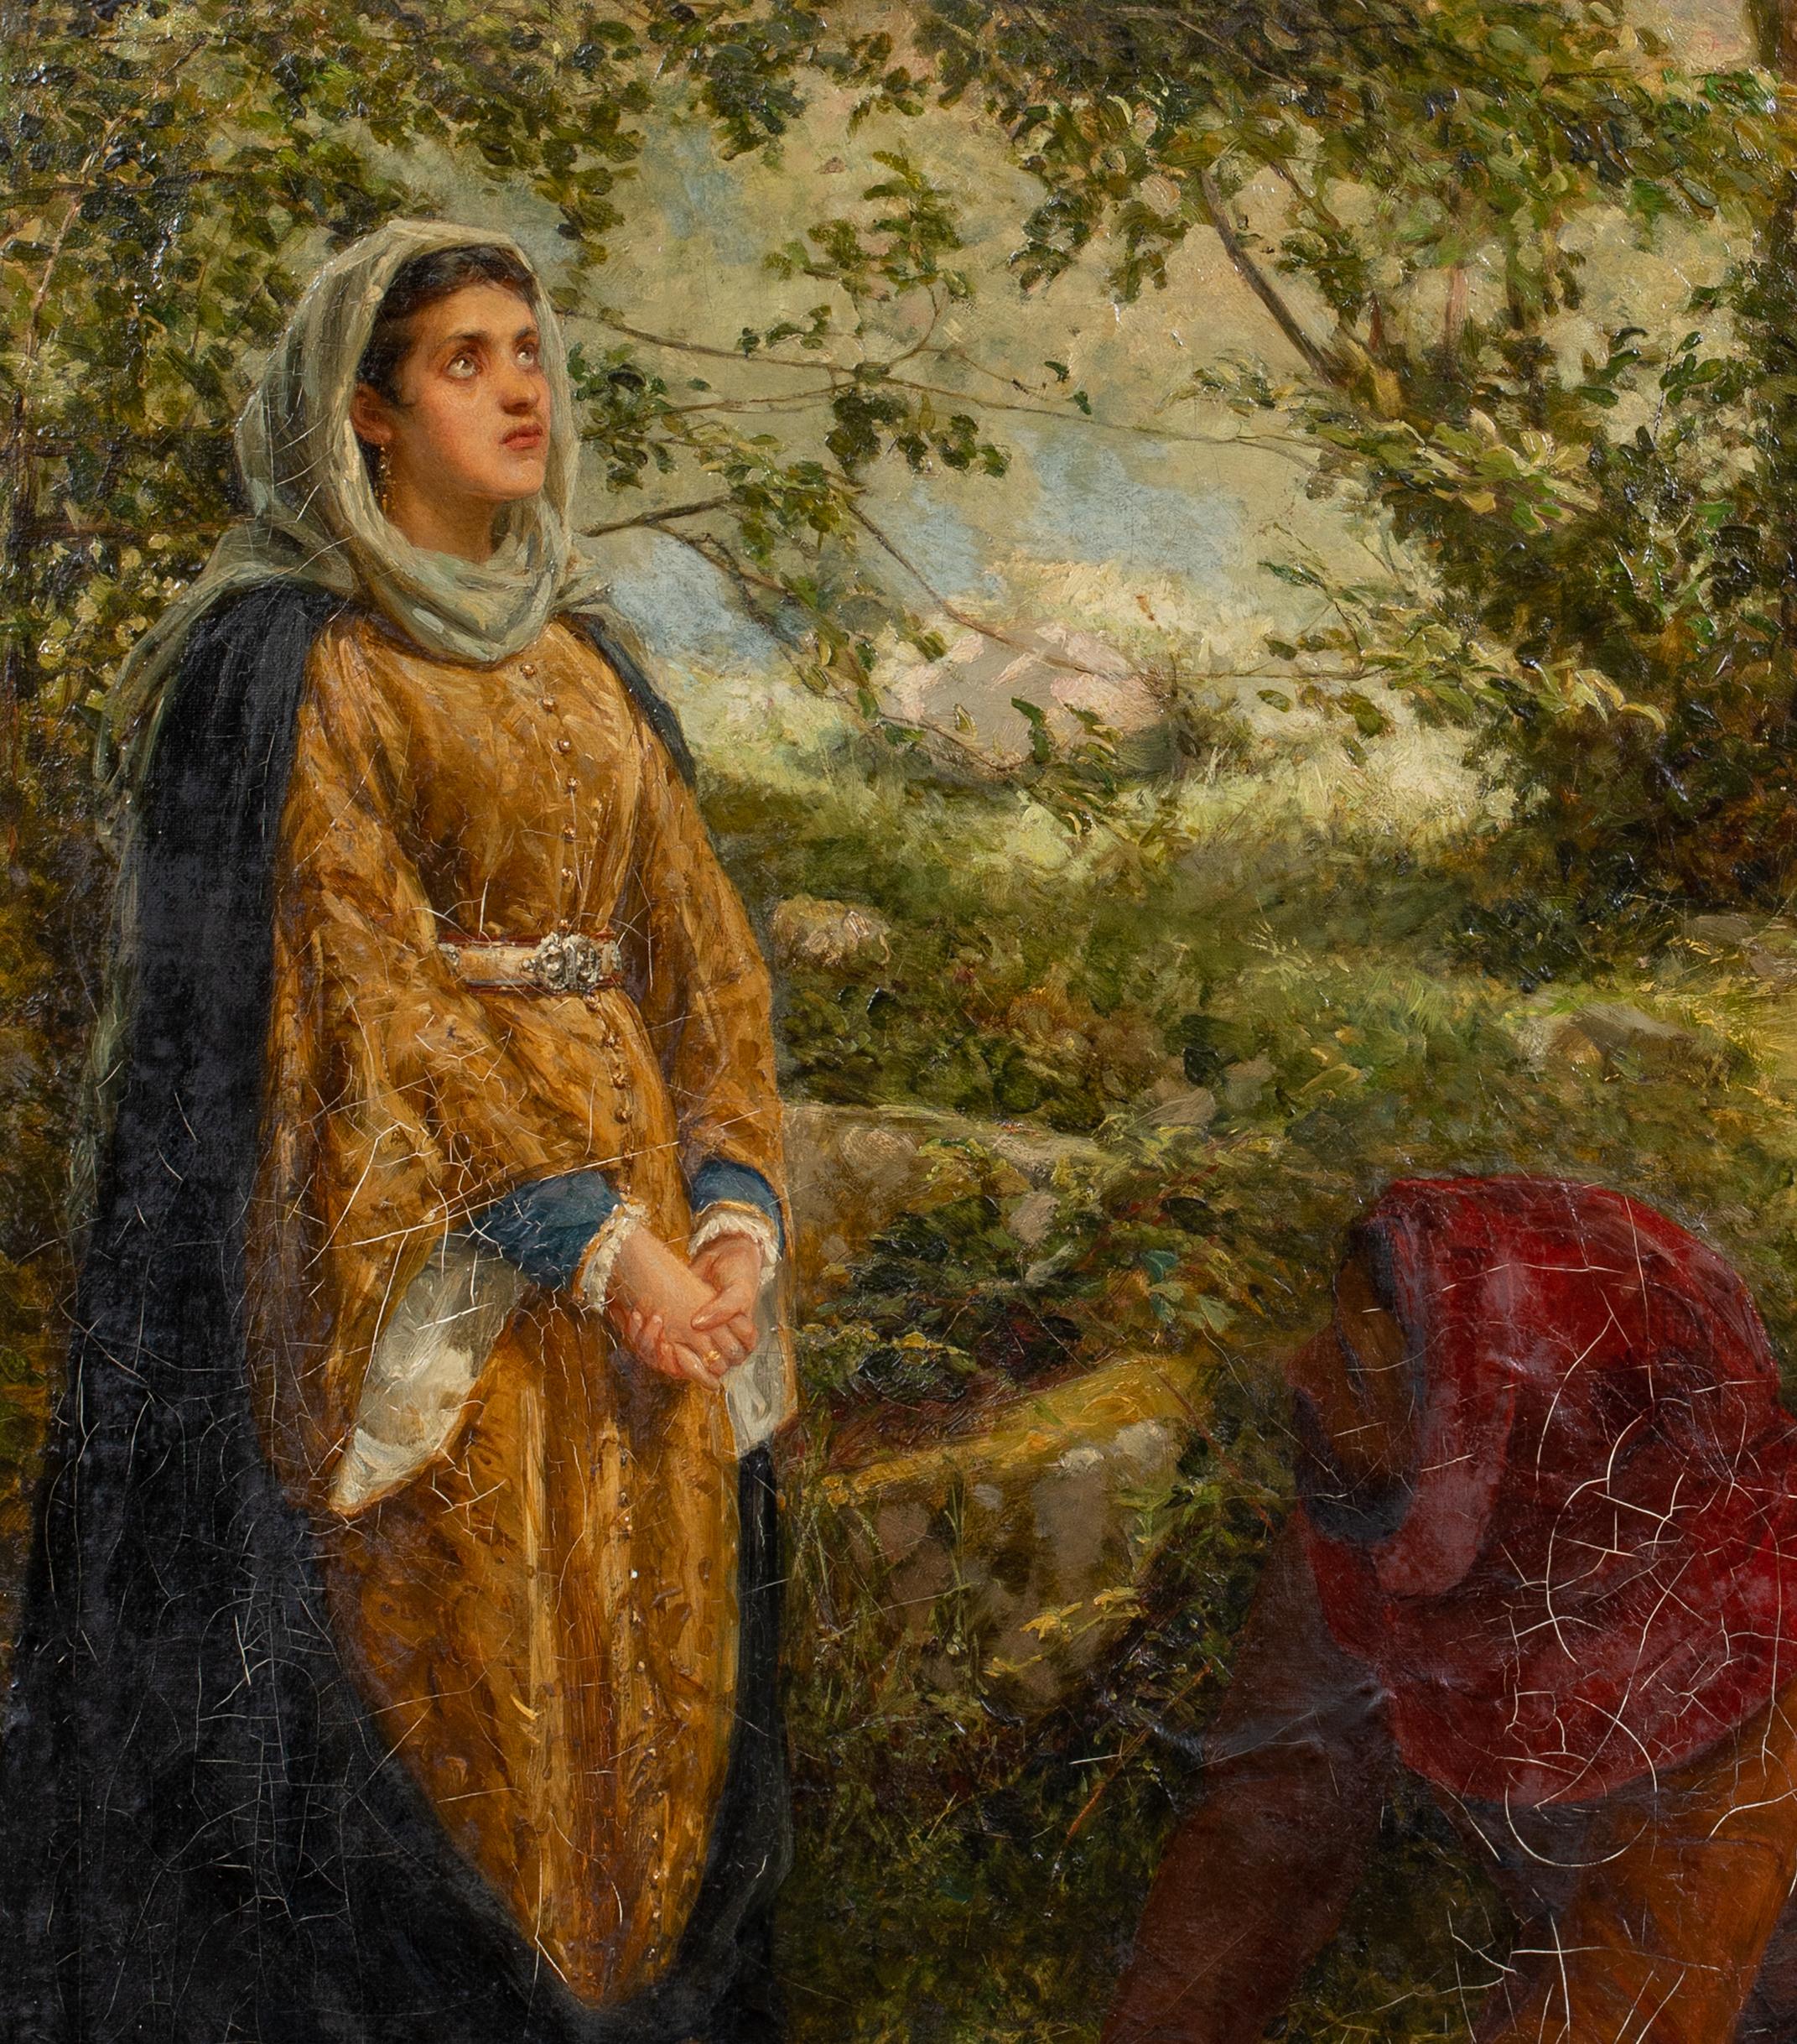 Rest From The Flight Into Egypt, 19th Century

inscribed to WILLIAM HOLMAN HUNT (1827-1910)

Large 19th century Pre-Raphaelite scene of the rest from the flight into Egypt, oil on canvas ascribed to William Holman Hunt. Beautiful scene typical of